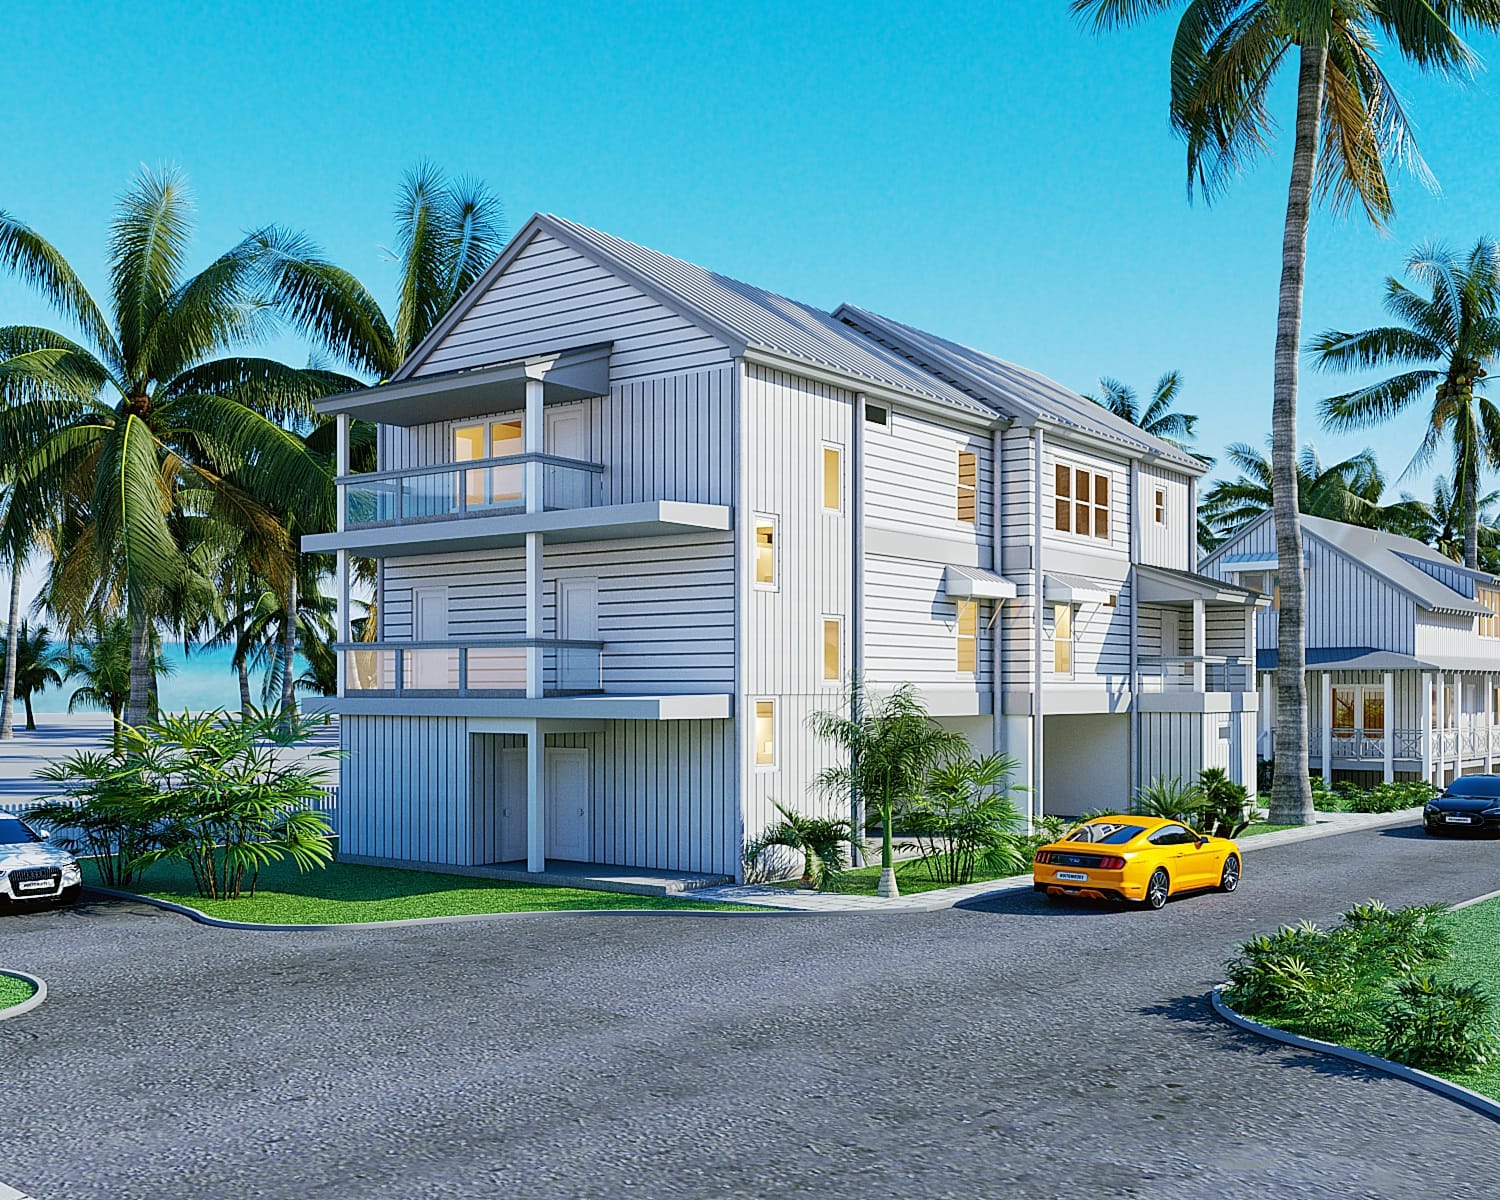 Beach Small House View 2 Exterior 3D Visualization